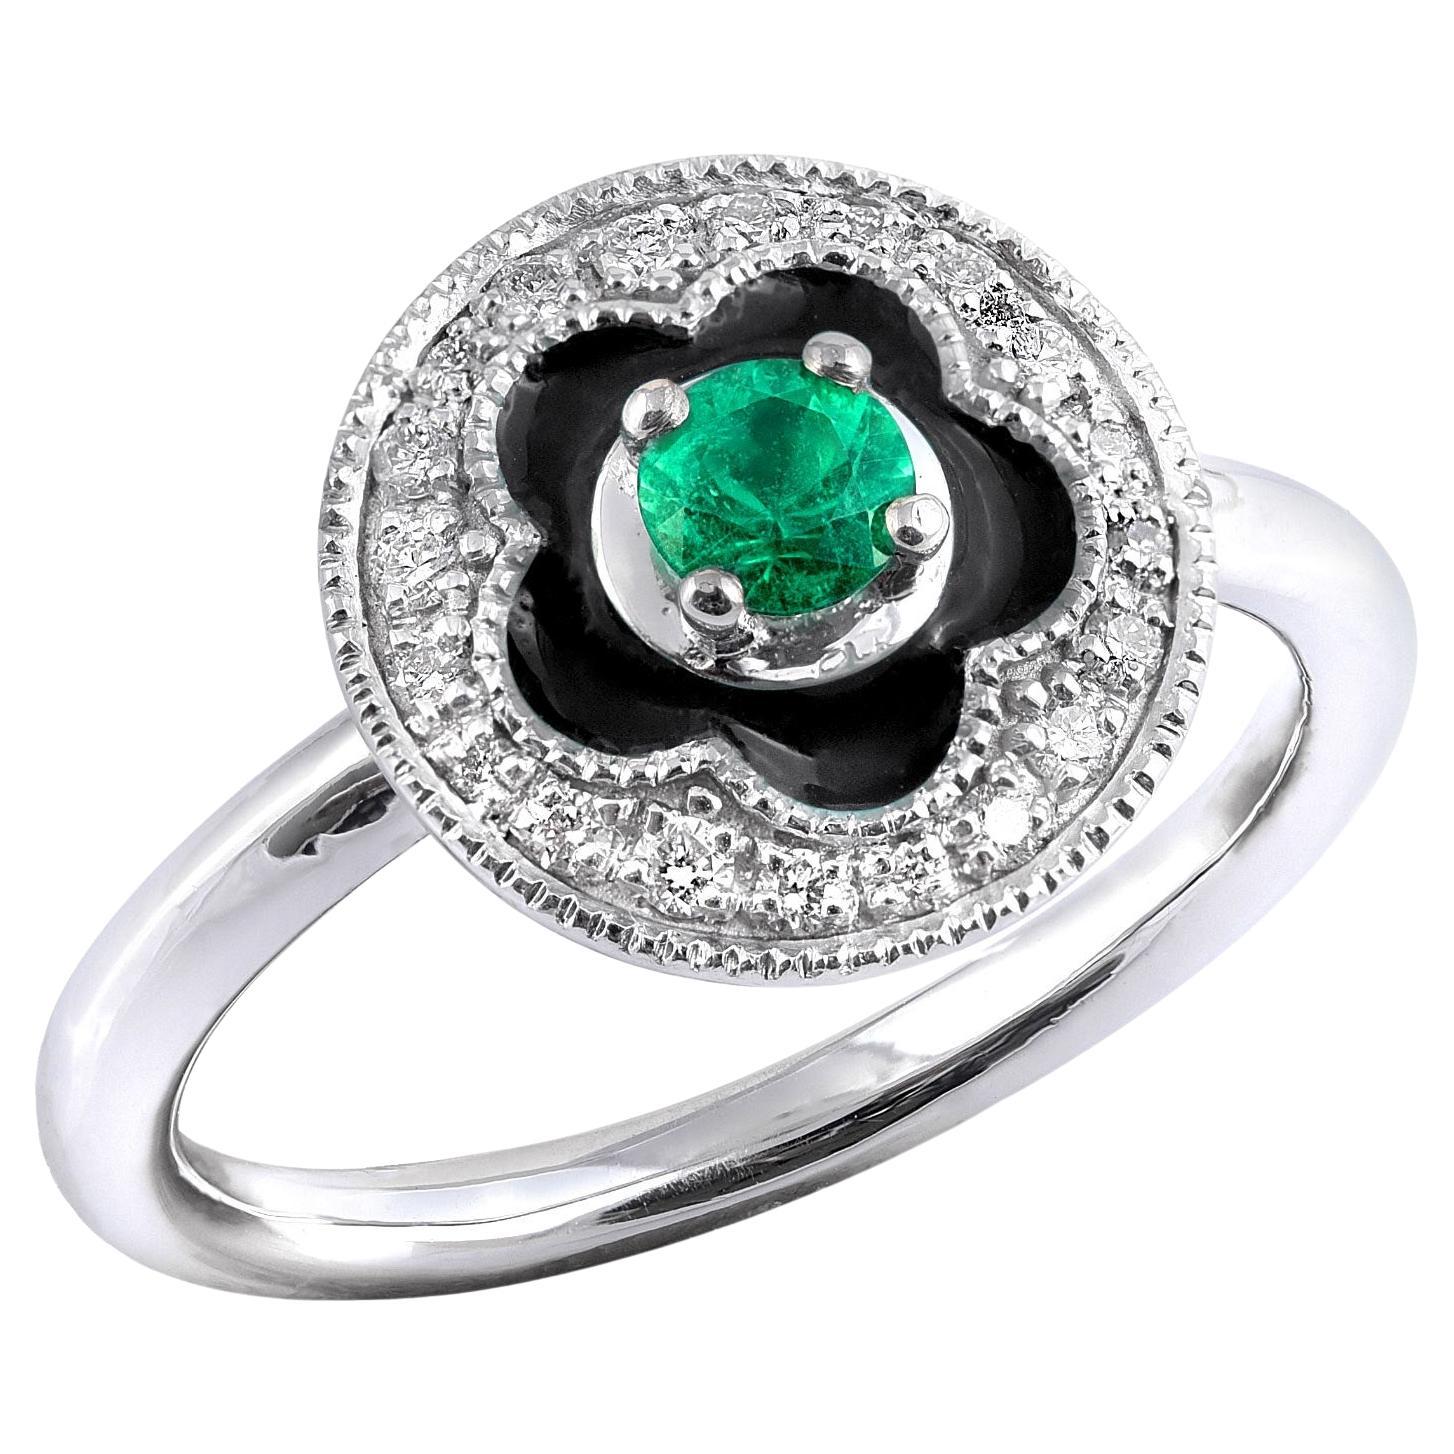 0.17 Carats Emerald Diamonds set with black enamel in 14K White Gold Ring For Sale